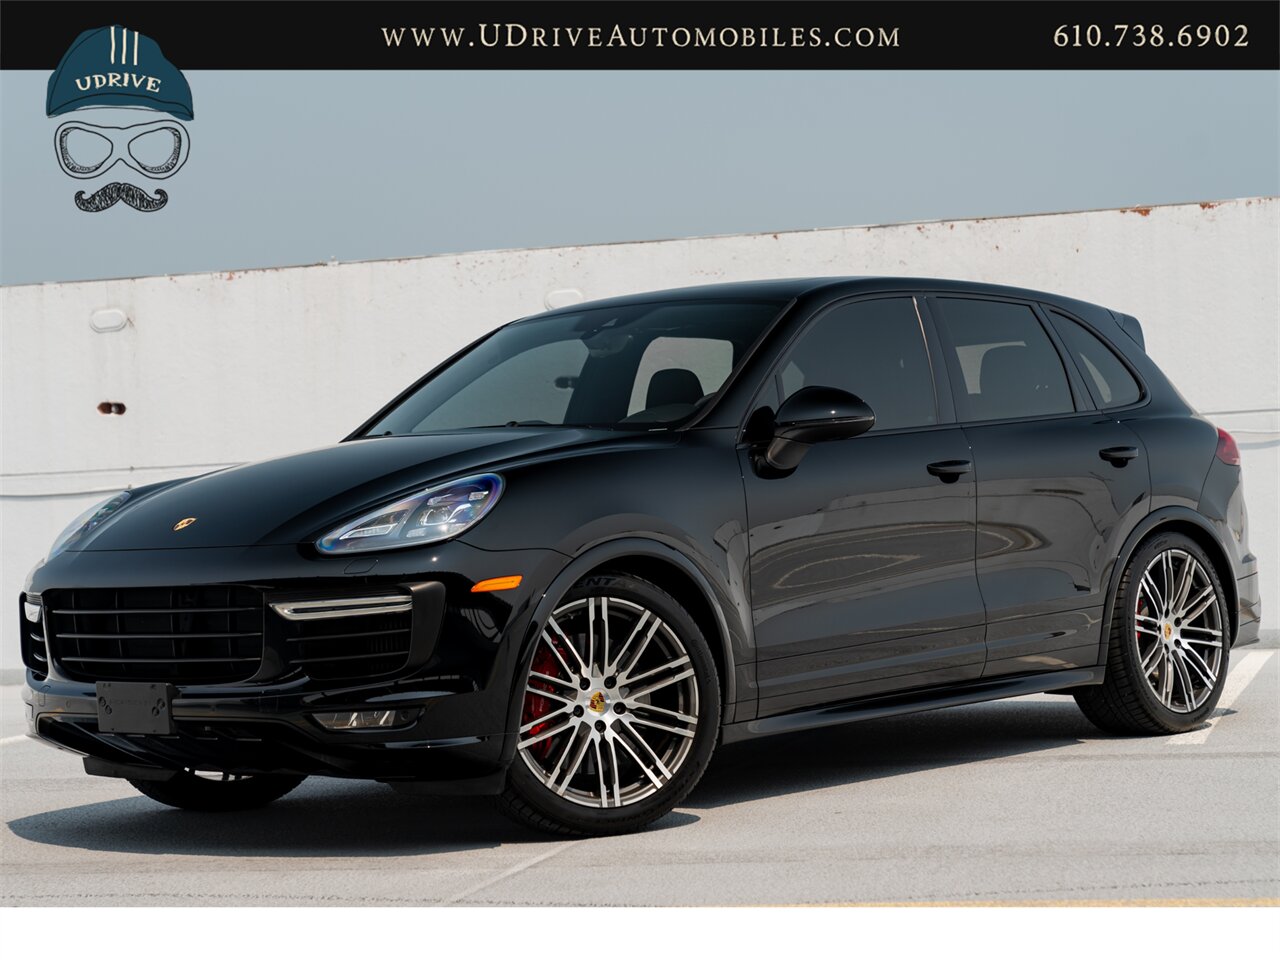 2016 Porsche Cayenne GTS  CPO Warranty 21in Whls Sport Chrono Red Dial Alcantara Red Belts Pano - Photo 1 - West Chester, PA 19382